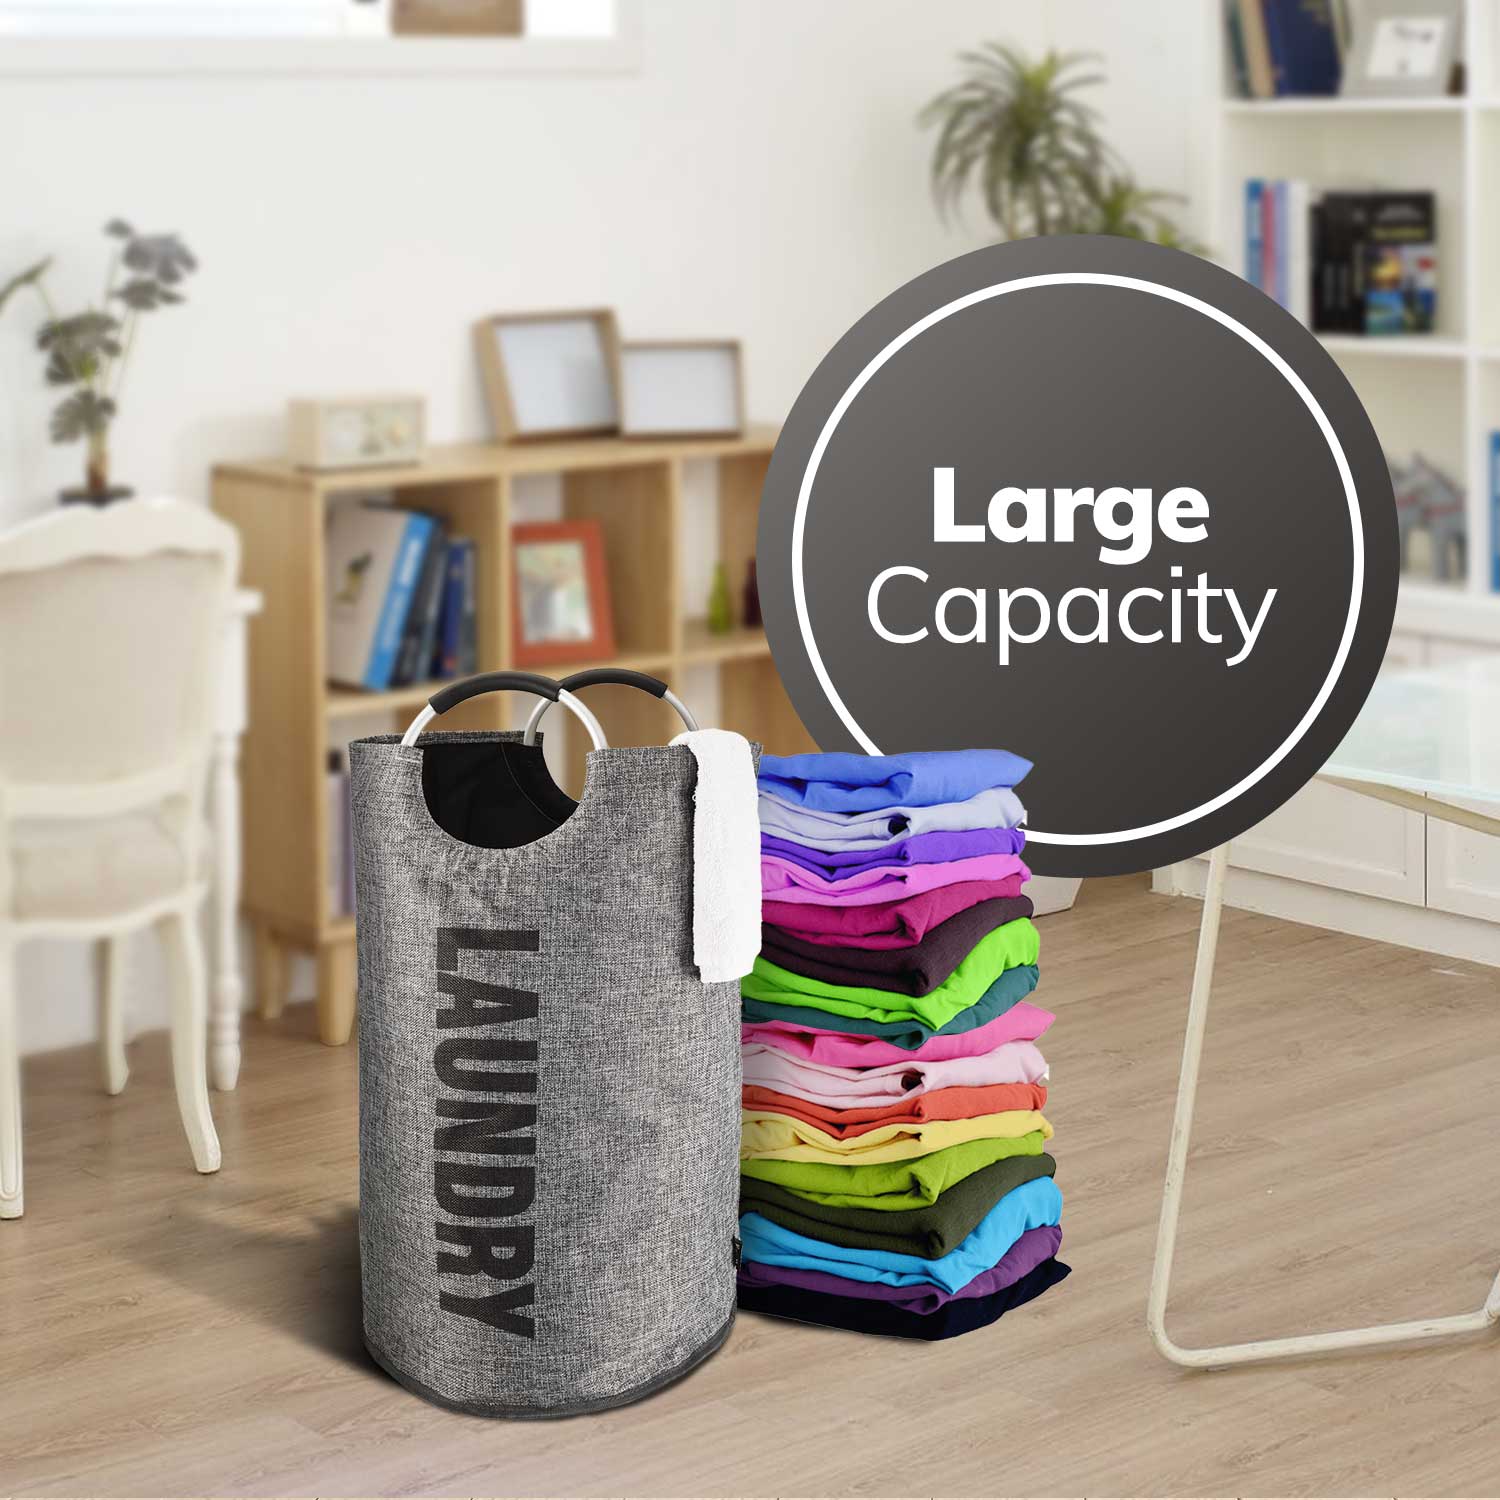 82L Collapsible Large Laundry Basket - Foldable & Easy to Carry Washing Basket